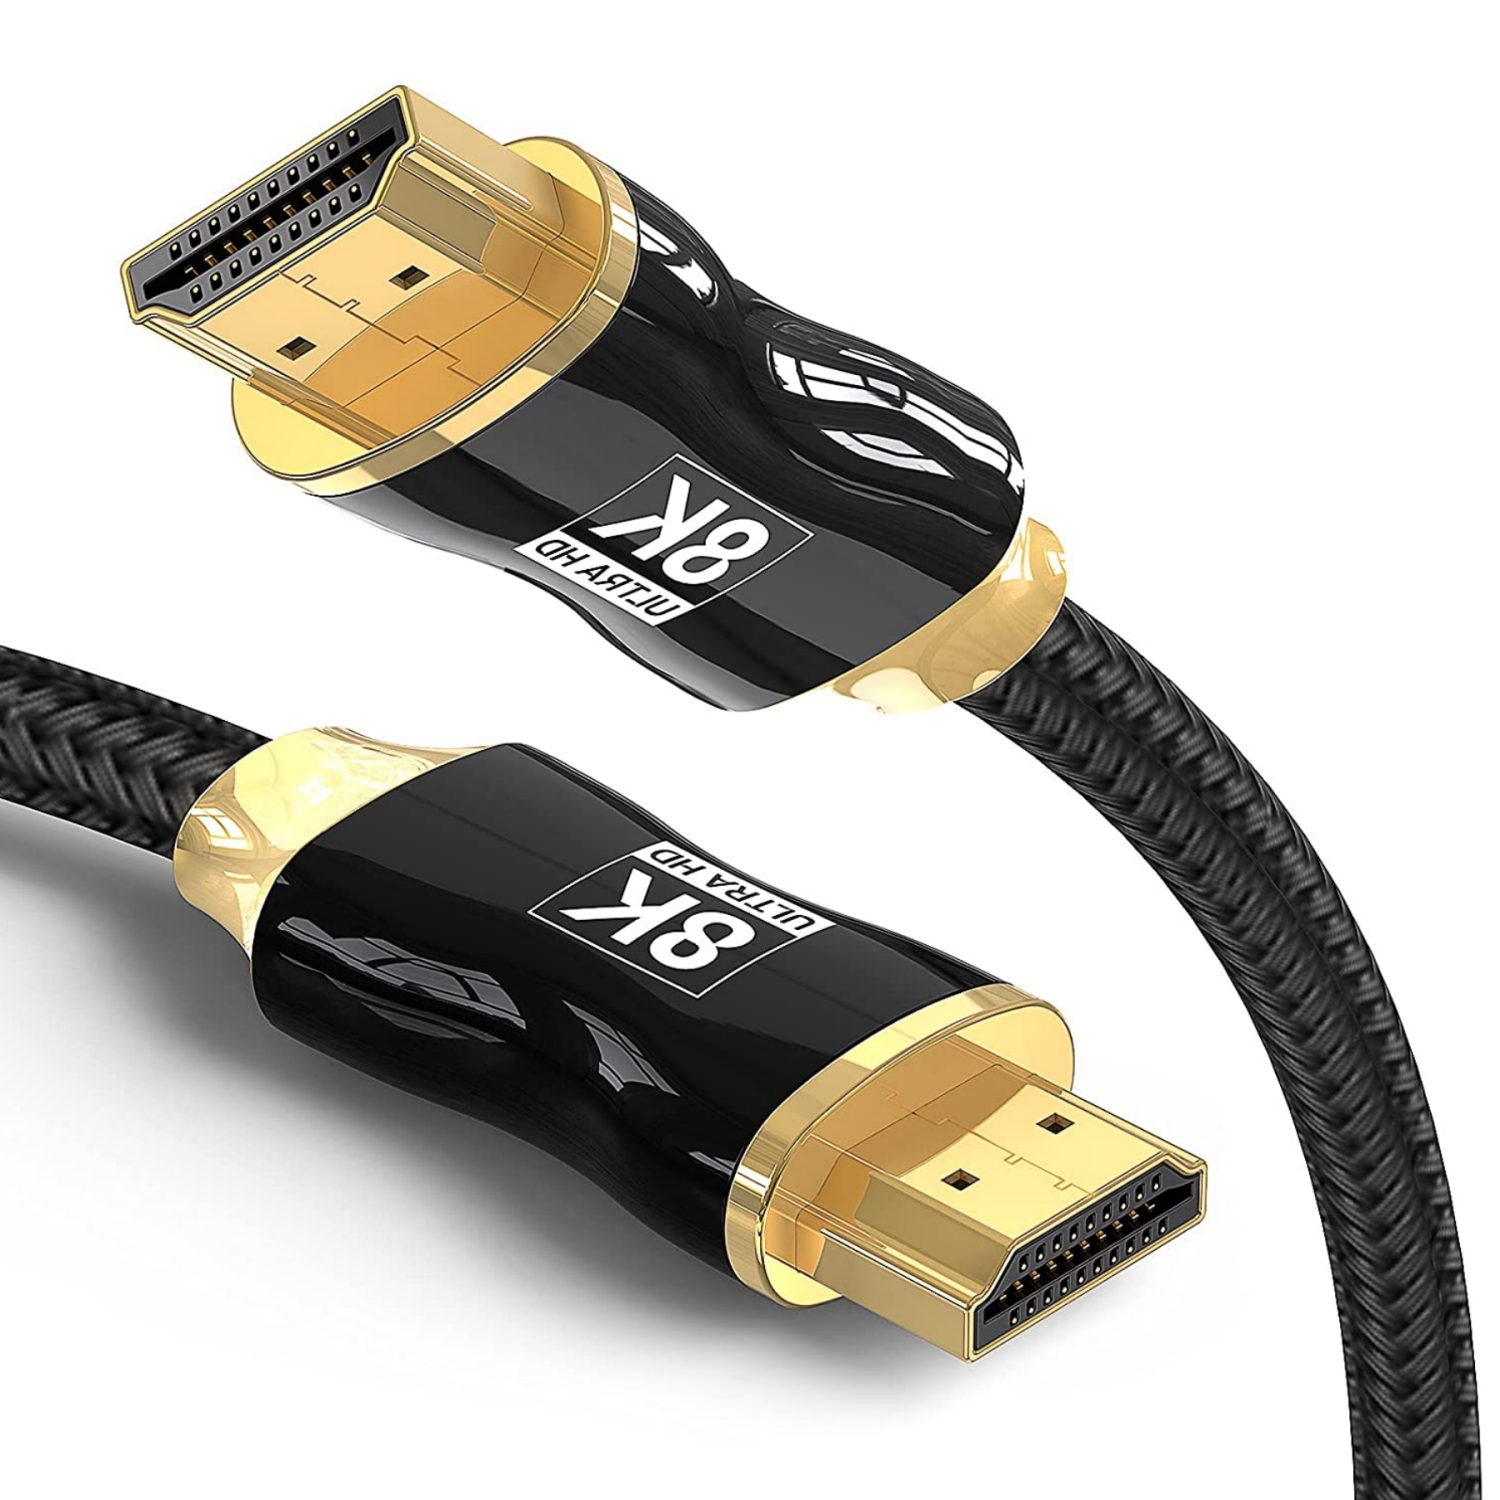 NIERBO 8K HDMI 2.1 Cable 6.6Ft, Supports 48Gbps 8K@60Hz 4K@120Hz eARC HDCP2.2 2.3 Compatible with Apple Sony LG Samsung TV, PS5, PS4, One Series X, Xbox (Zinc Alloy housing)